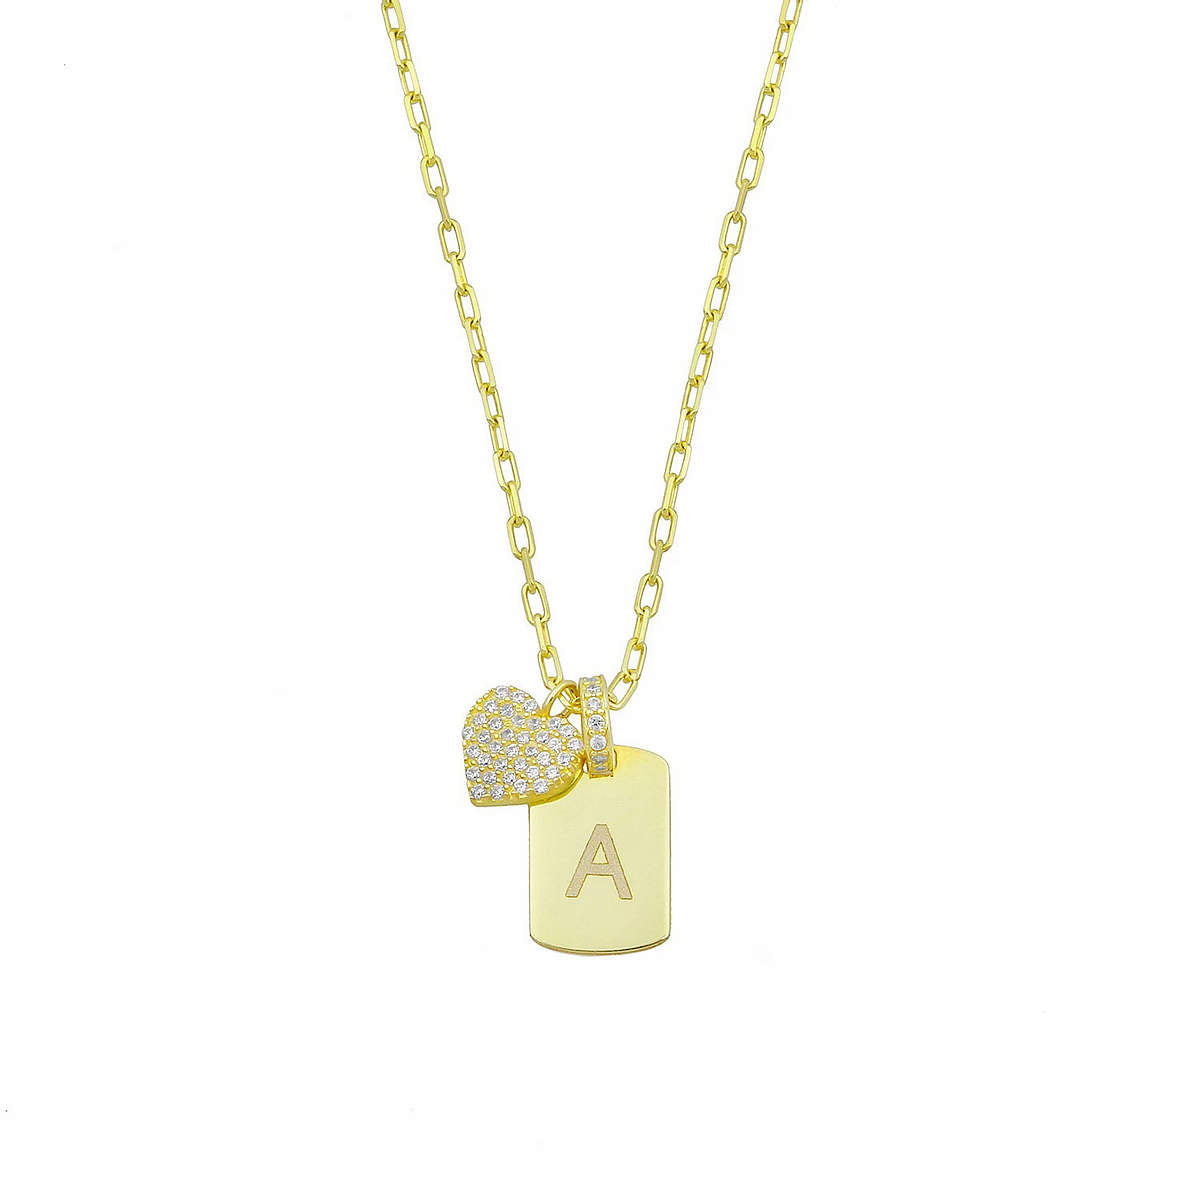 Queen of Hearts Initial Necklace